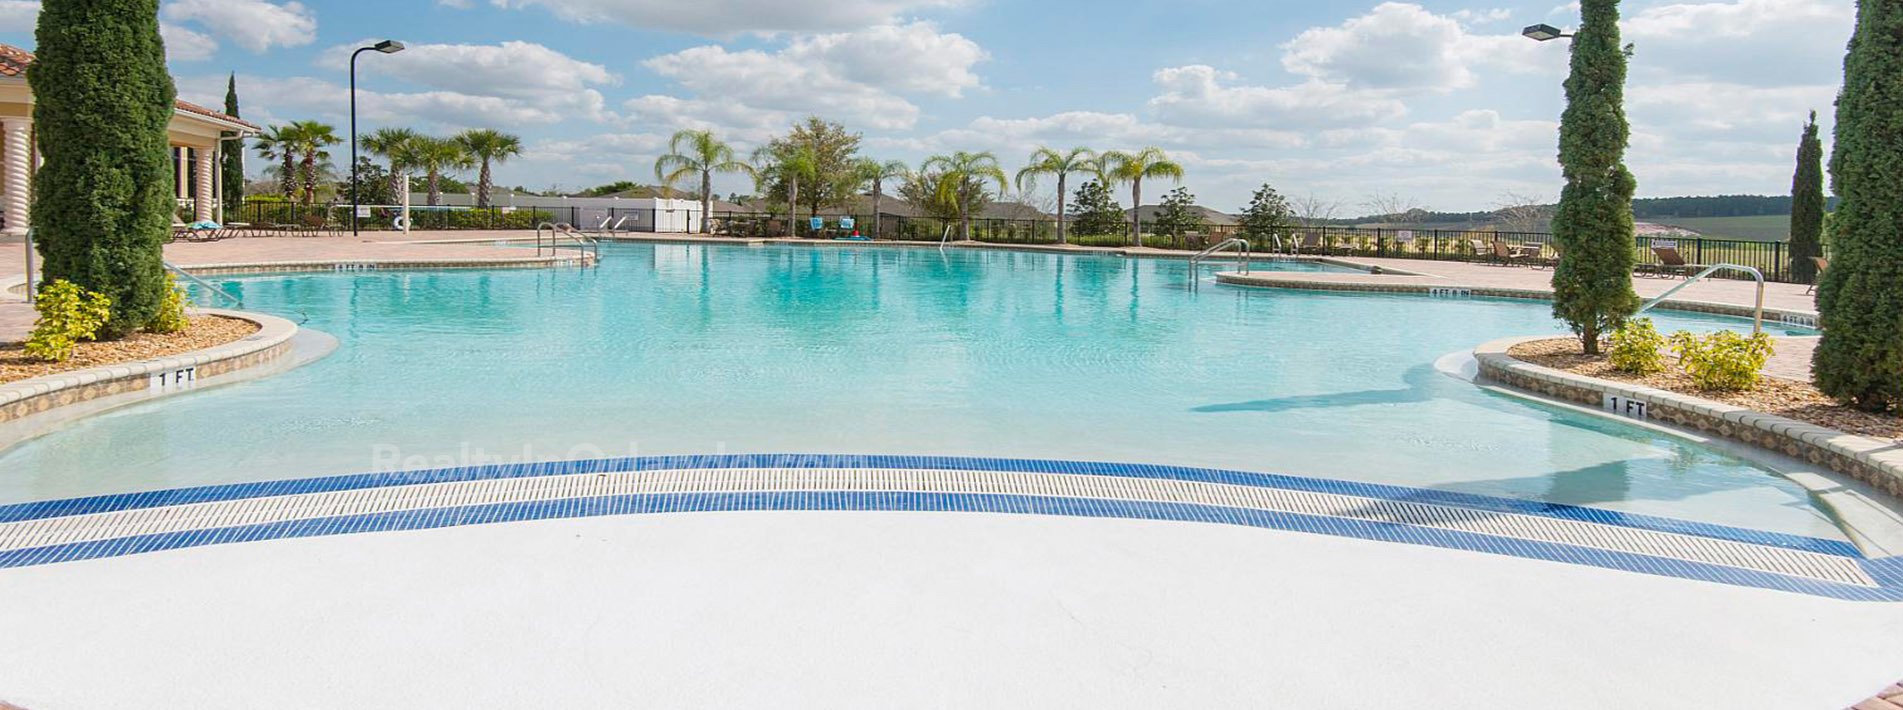 Heritage Hills - 55+ Active Adult Community Pool - Clermont